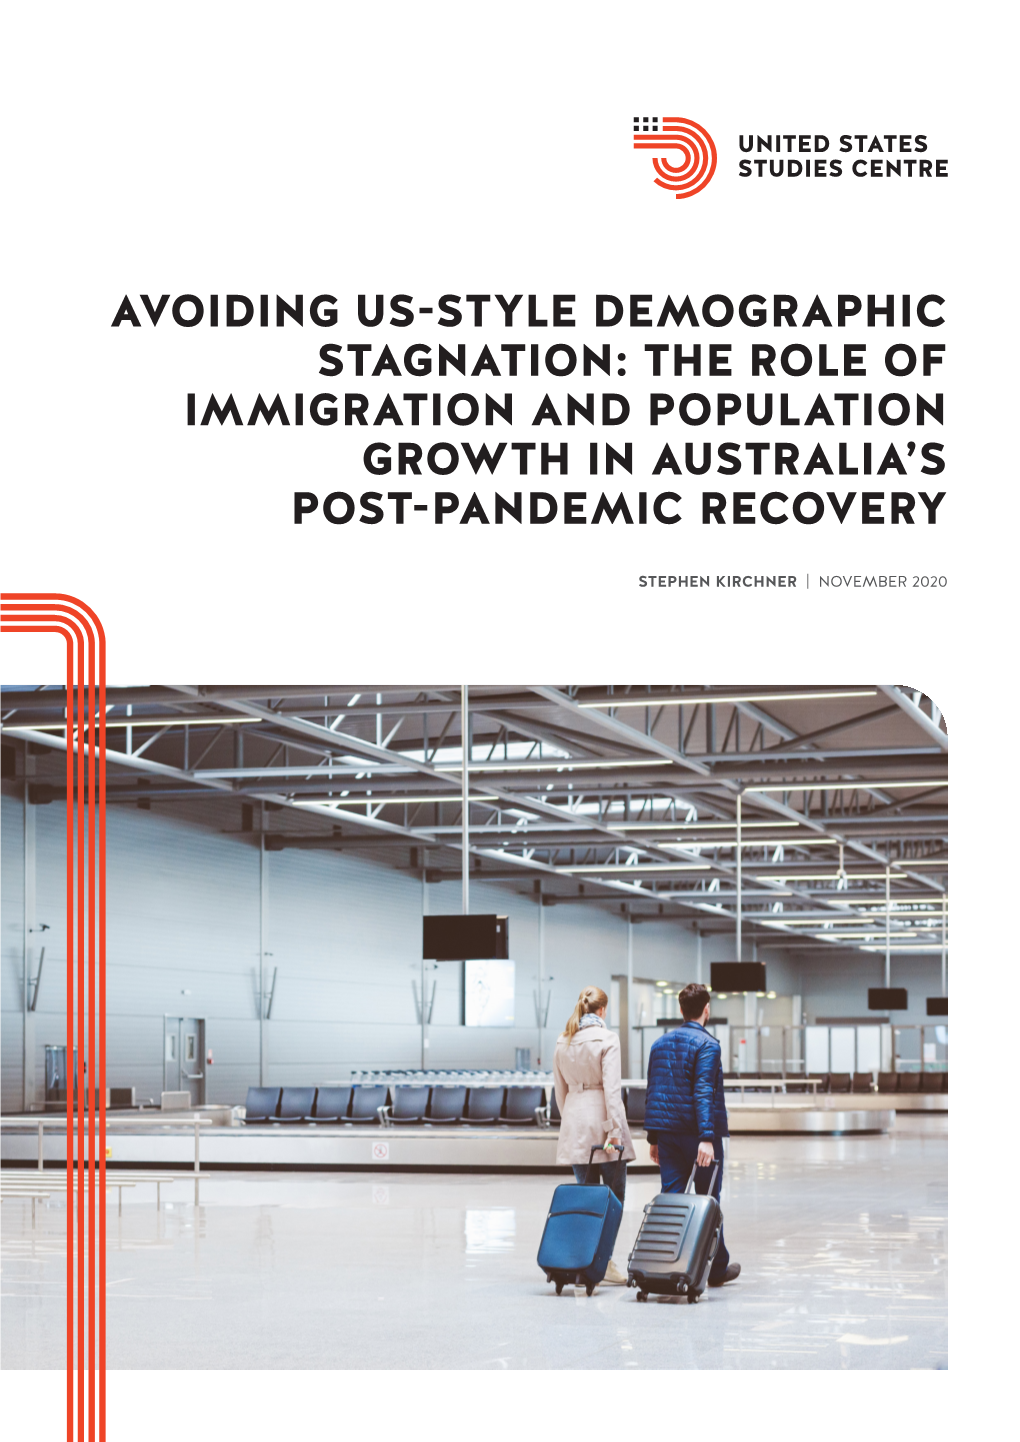 Avoiding Us-Style Demographic Stagnation: the Role of Immigration and Population Growth in Australia's Post-Pandemic Recovery